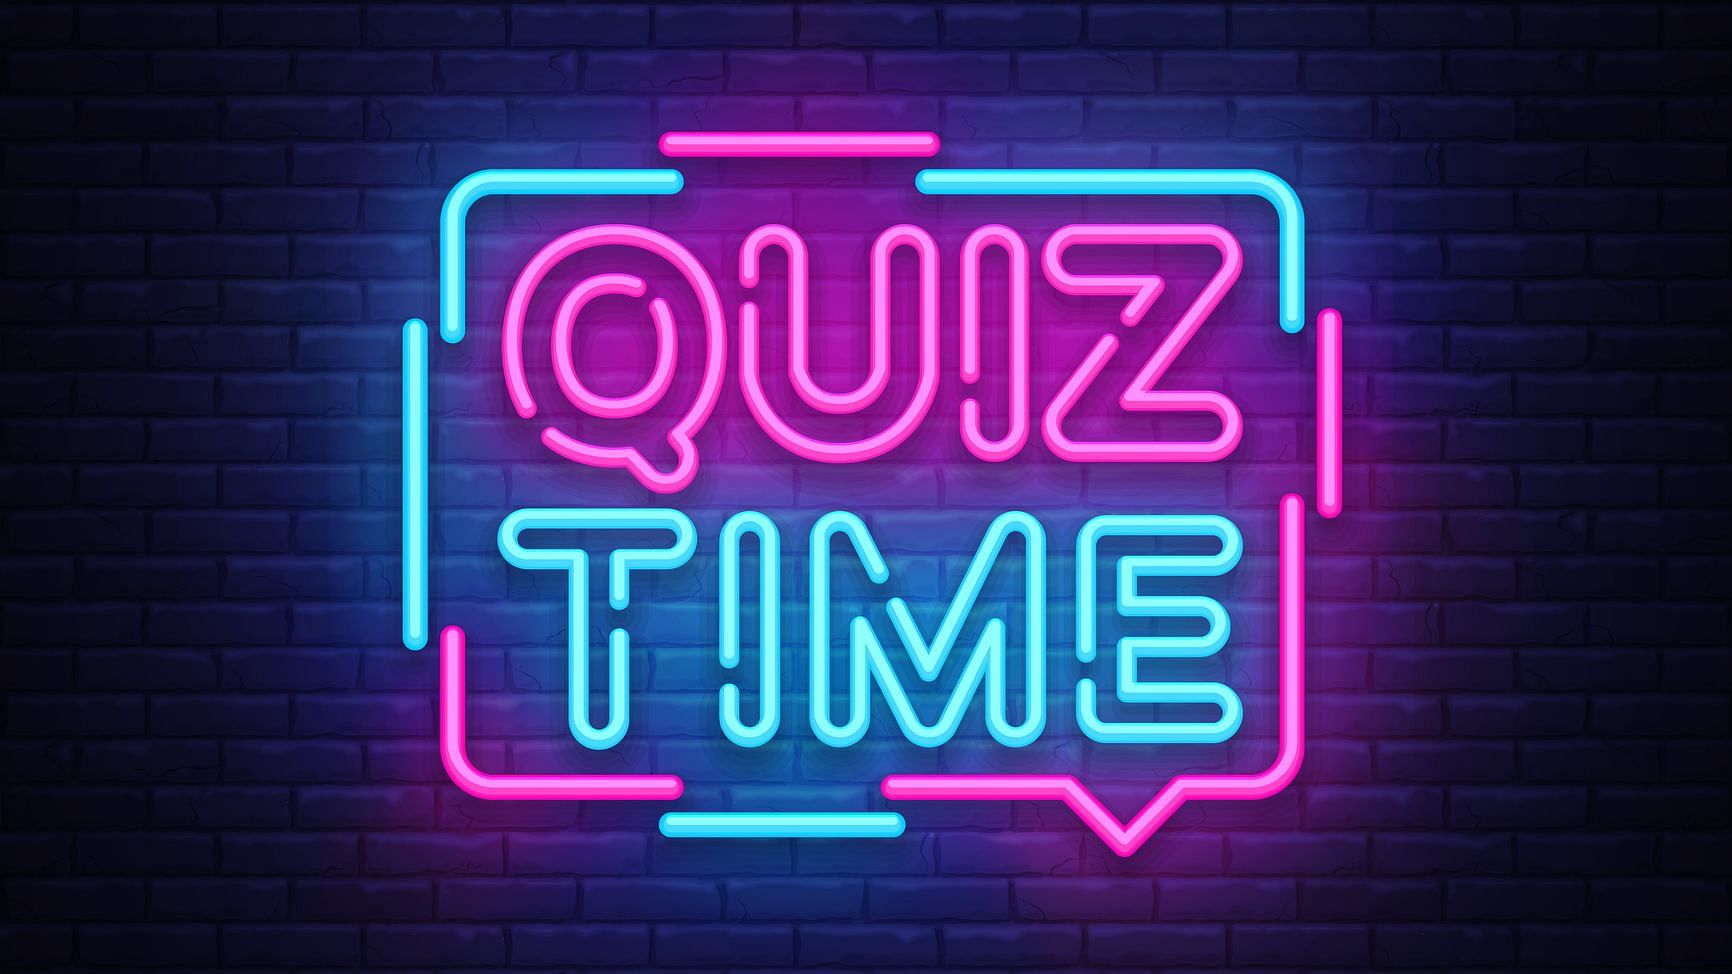 Amazon Quiz Questions and Answers Today, 28 February 2020